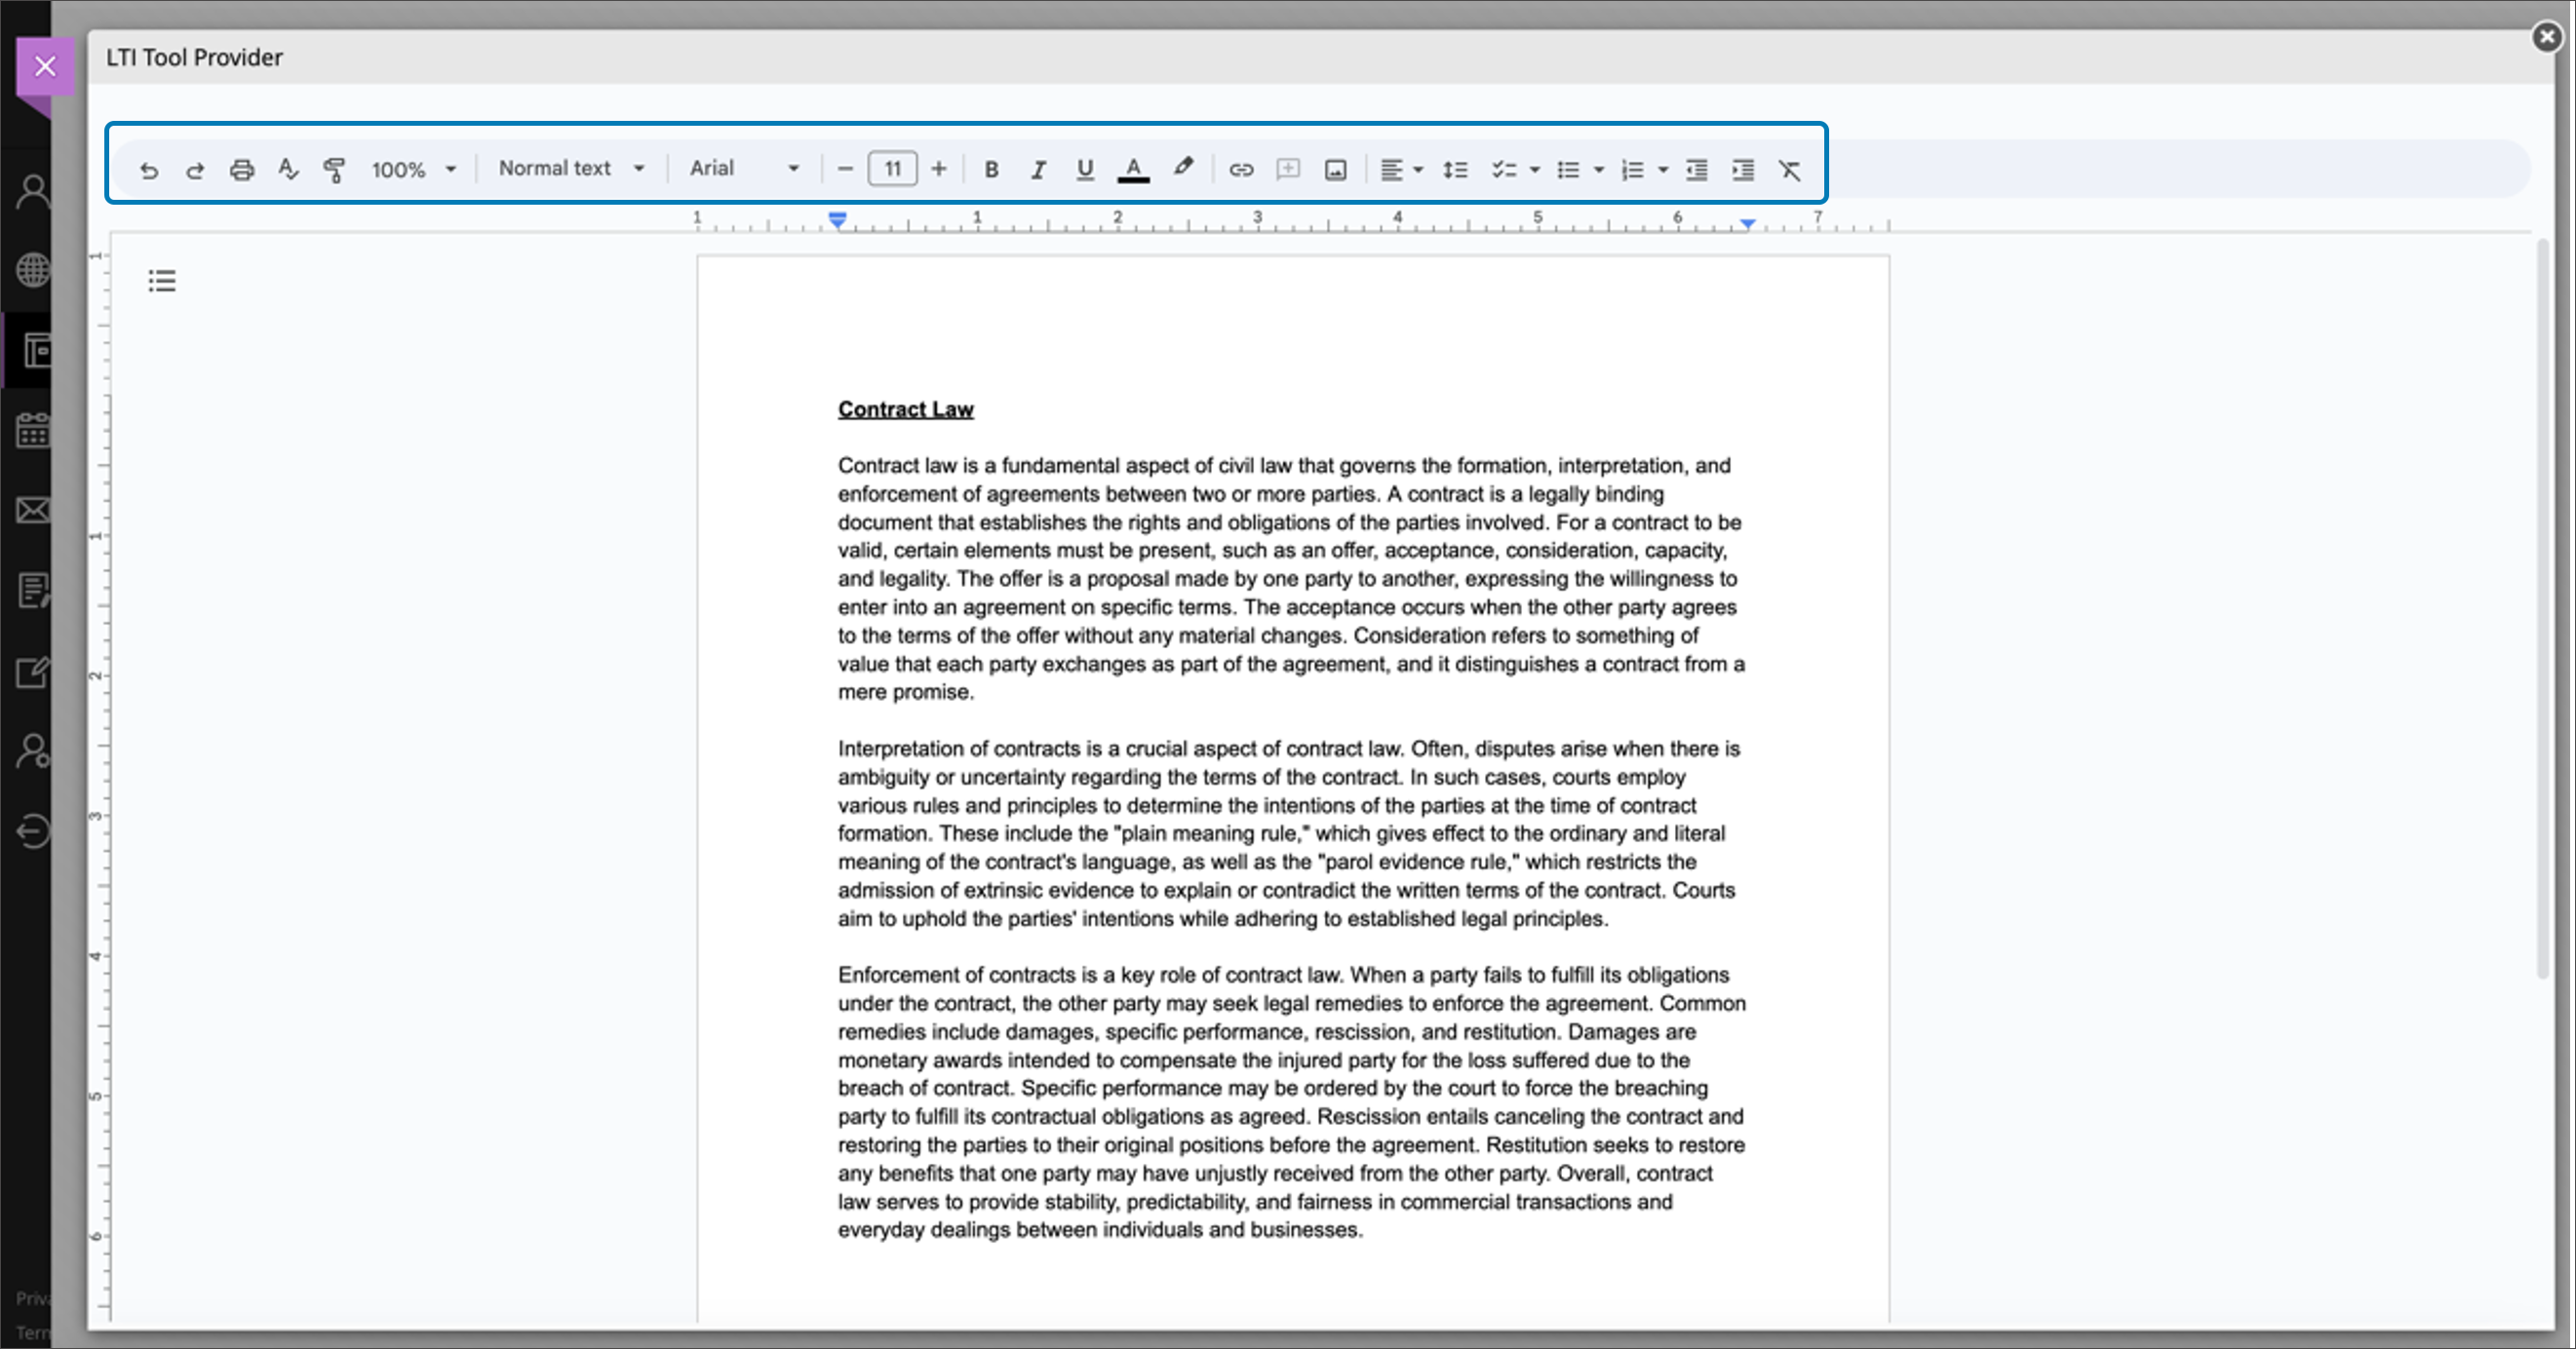 Students can view the file inline and edit